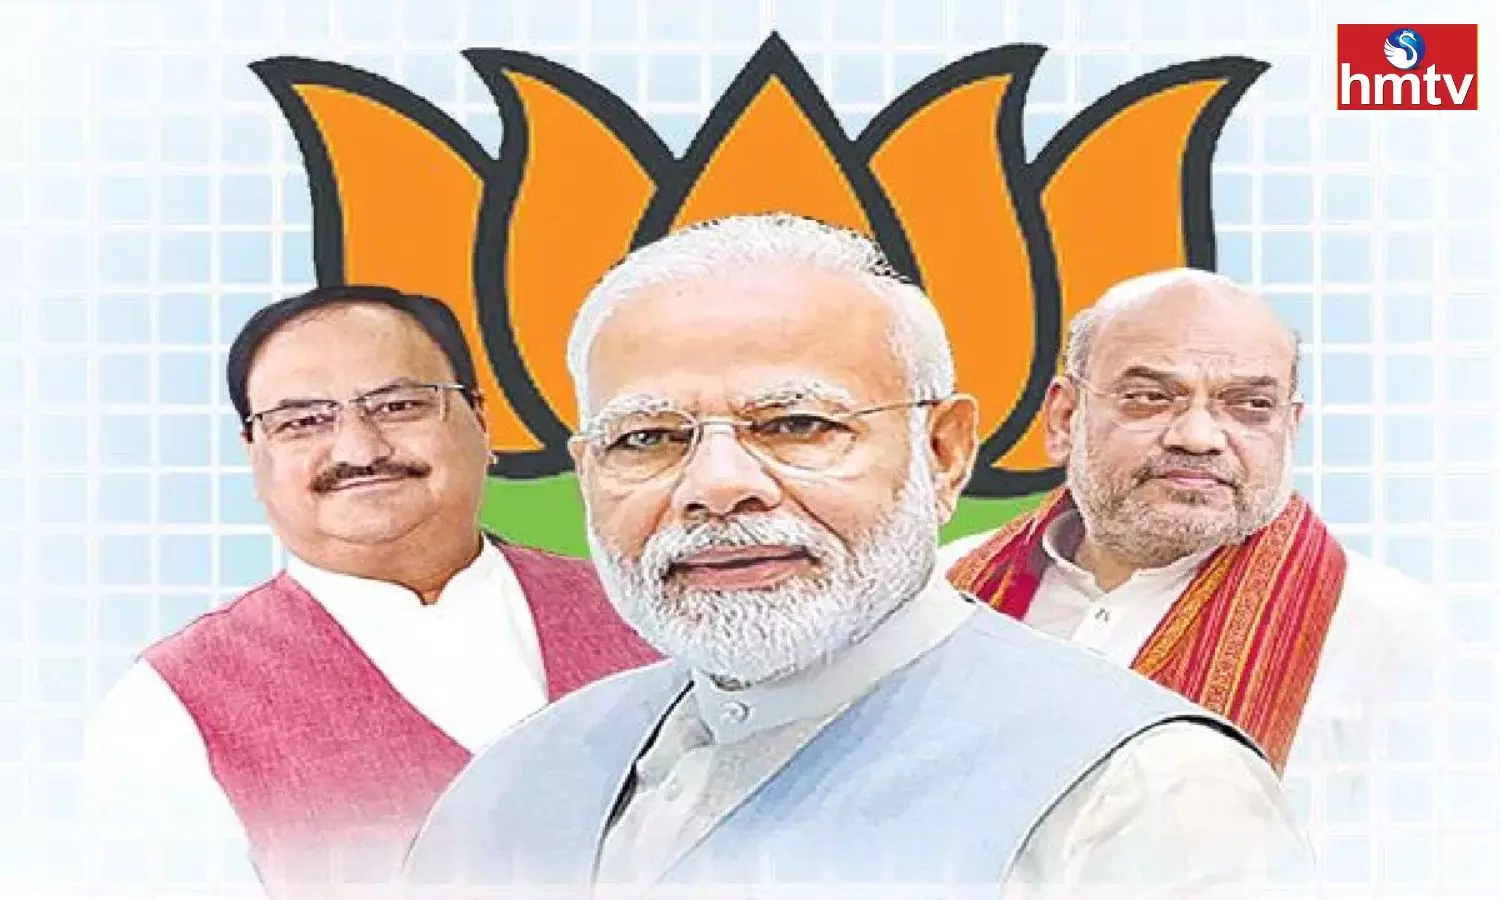 Bjp To Hold Its Two-Day National Council Today